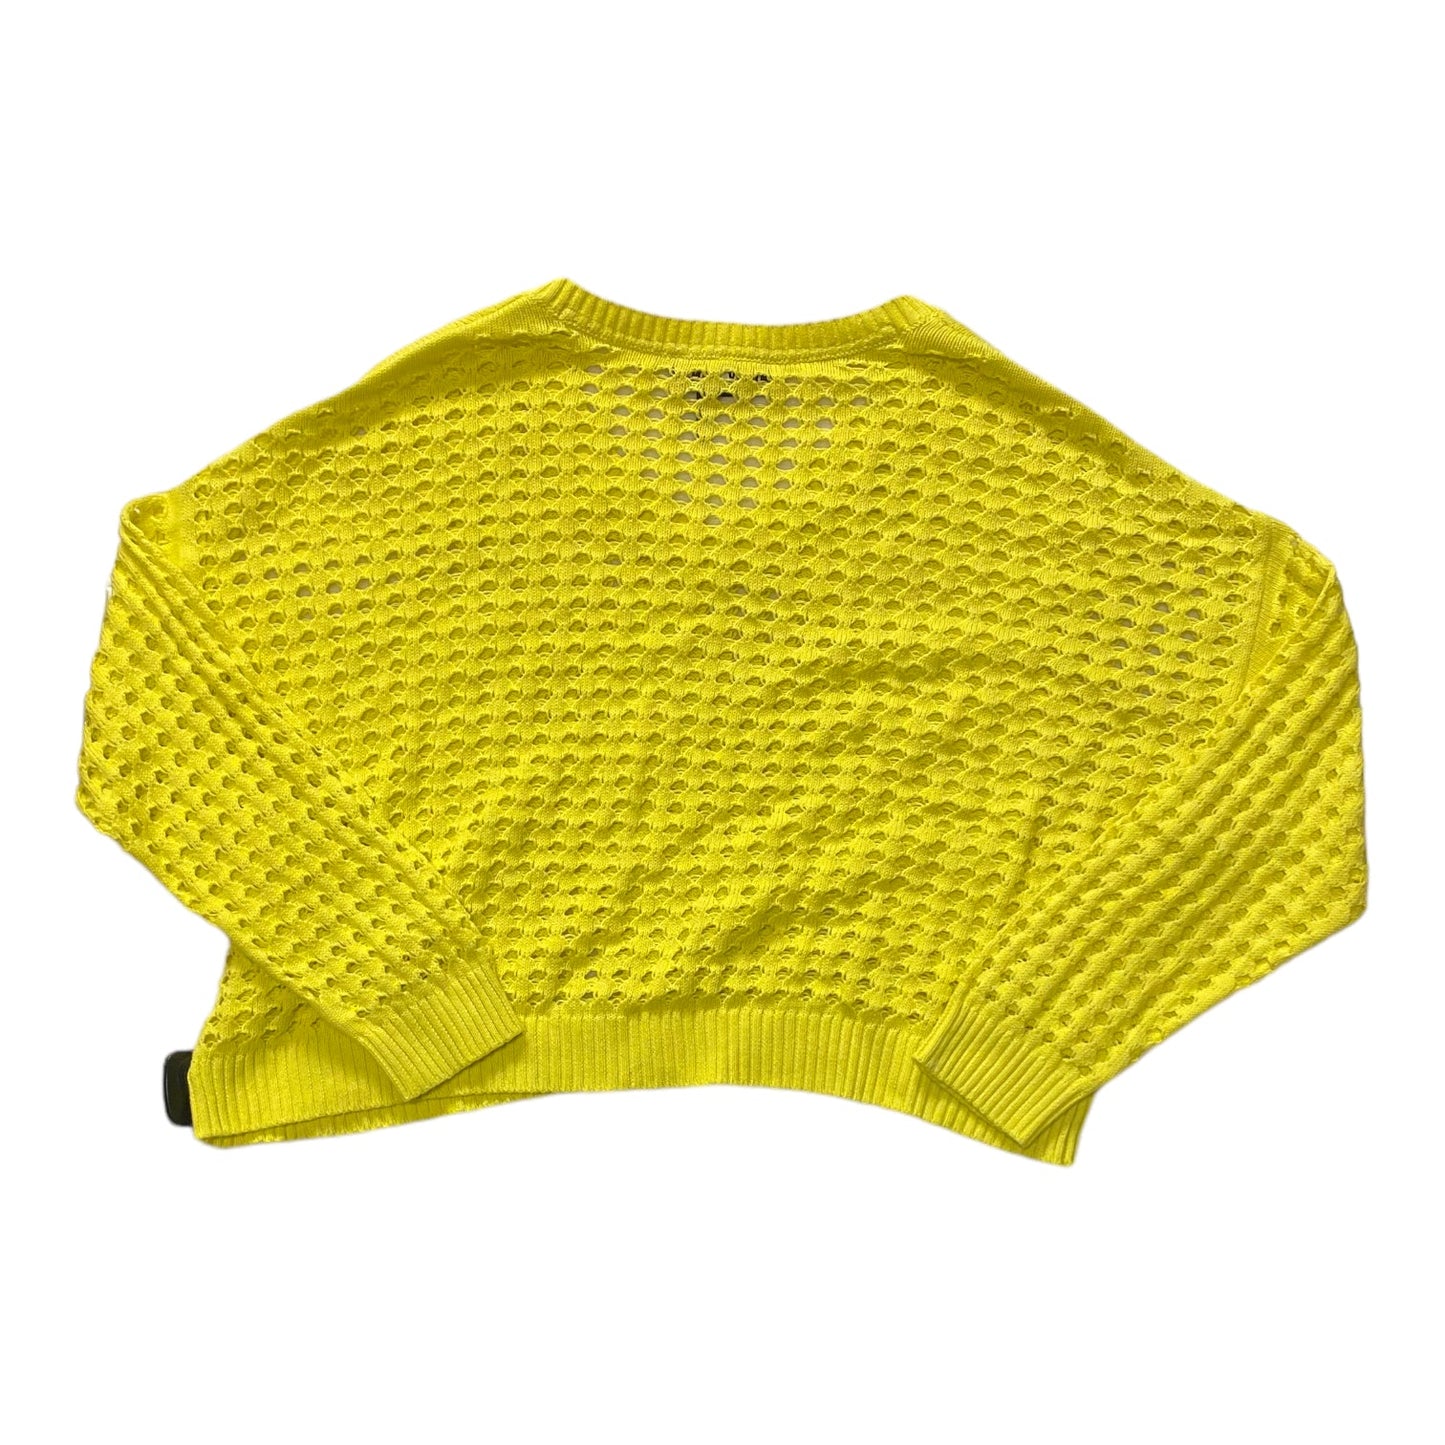 Yellow Sweater Dkny, Size S